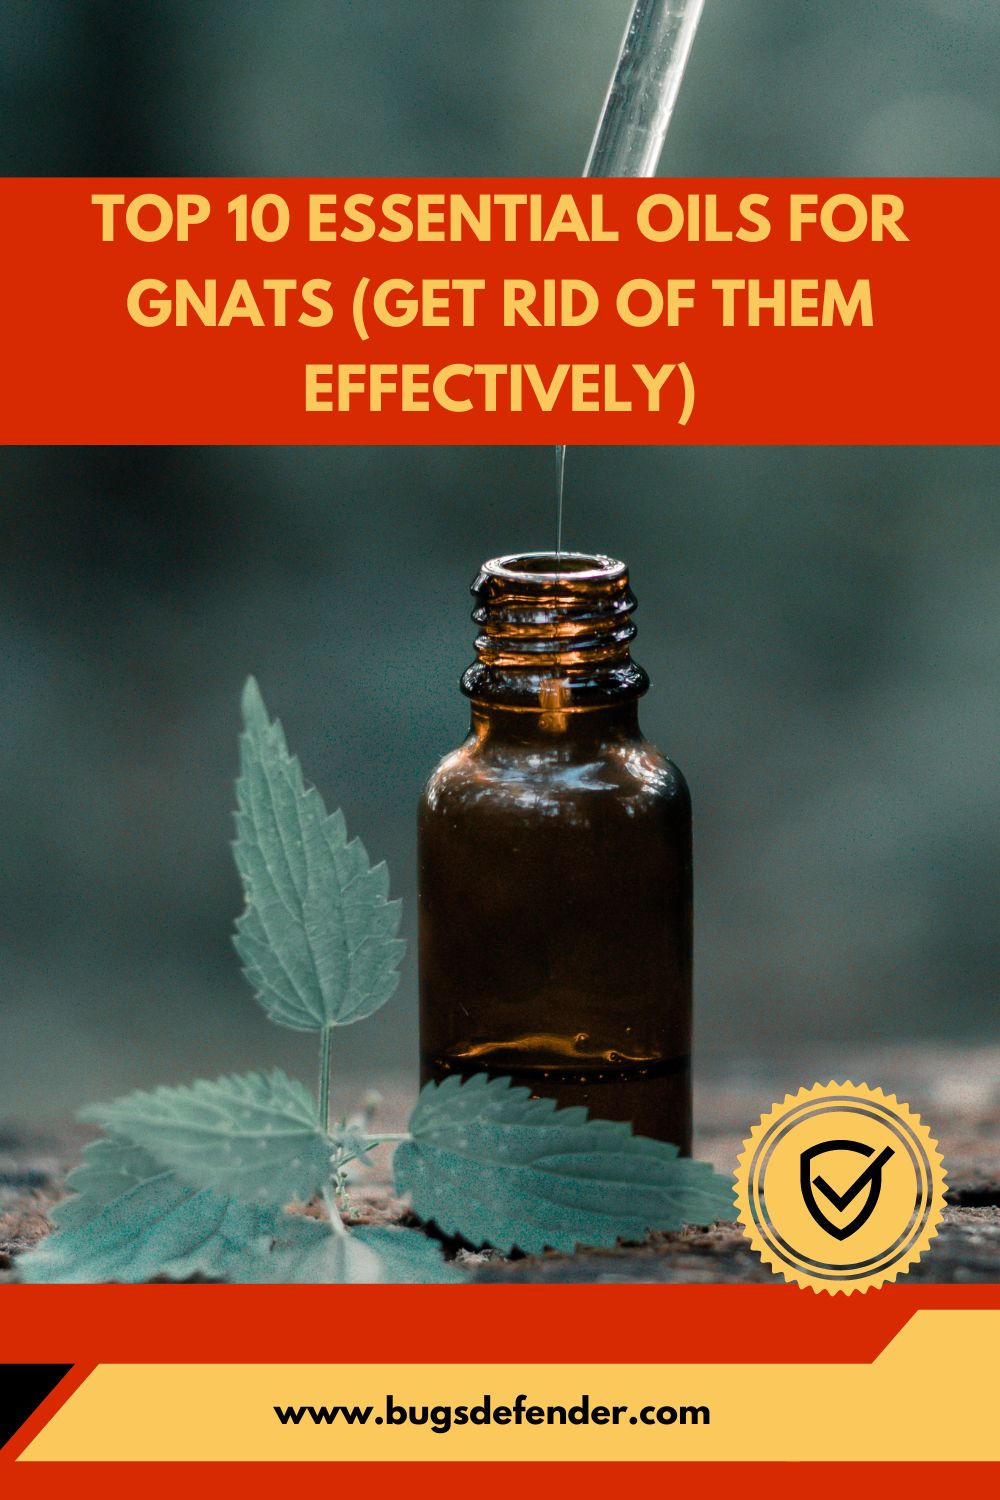 Top 10 Essential Oils For Gnats pin1